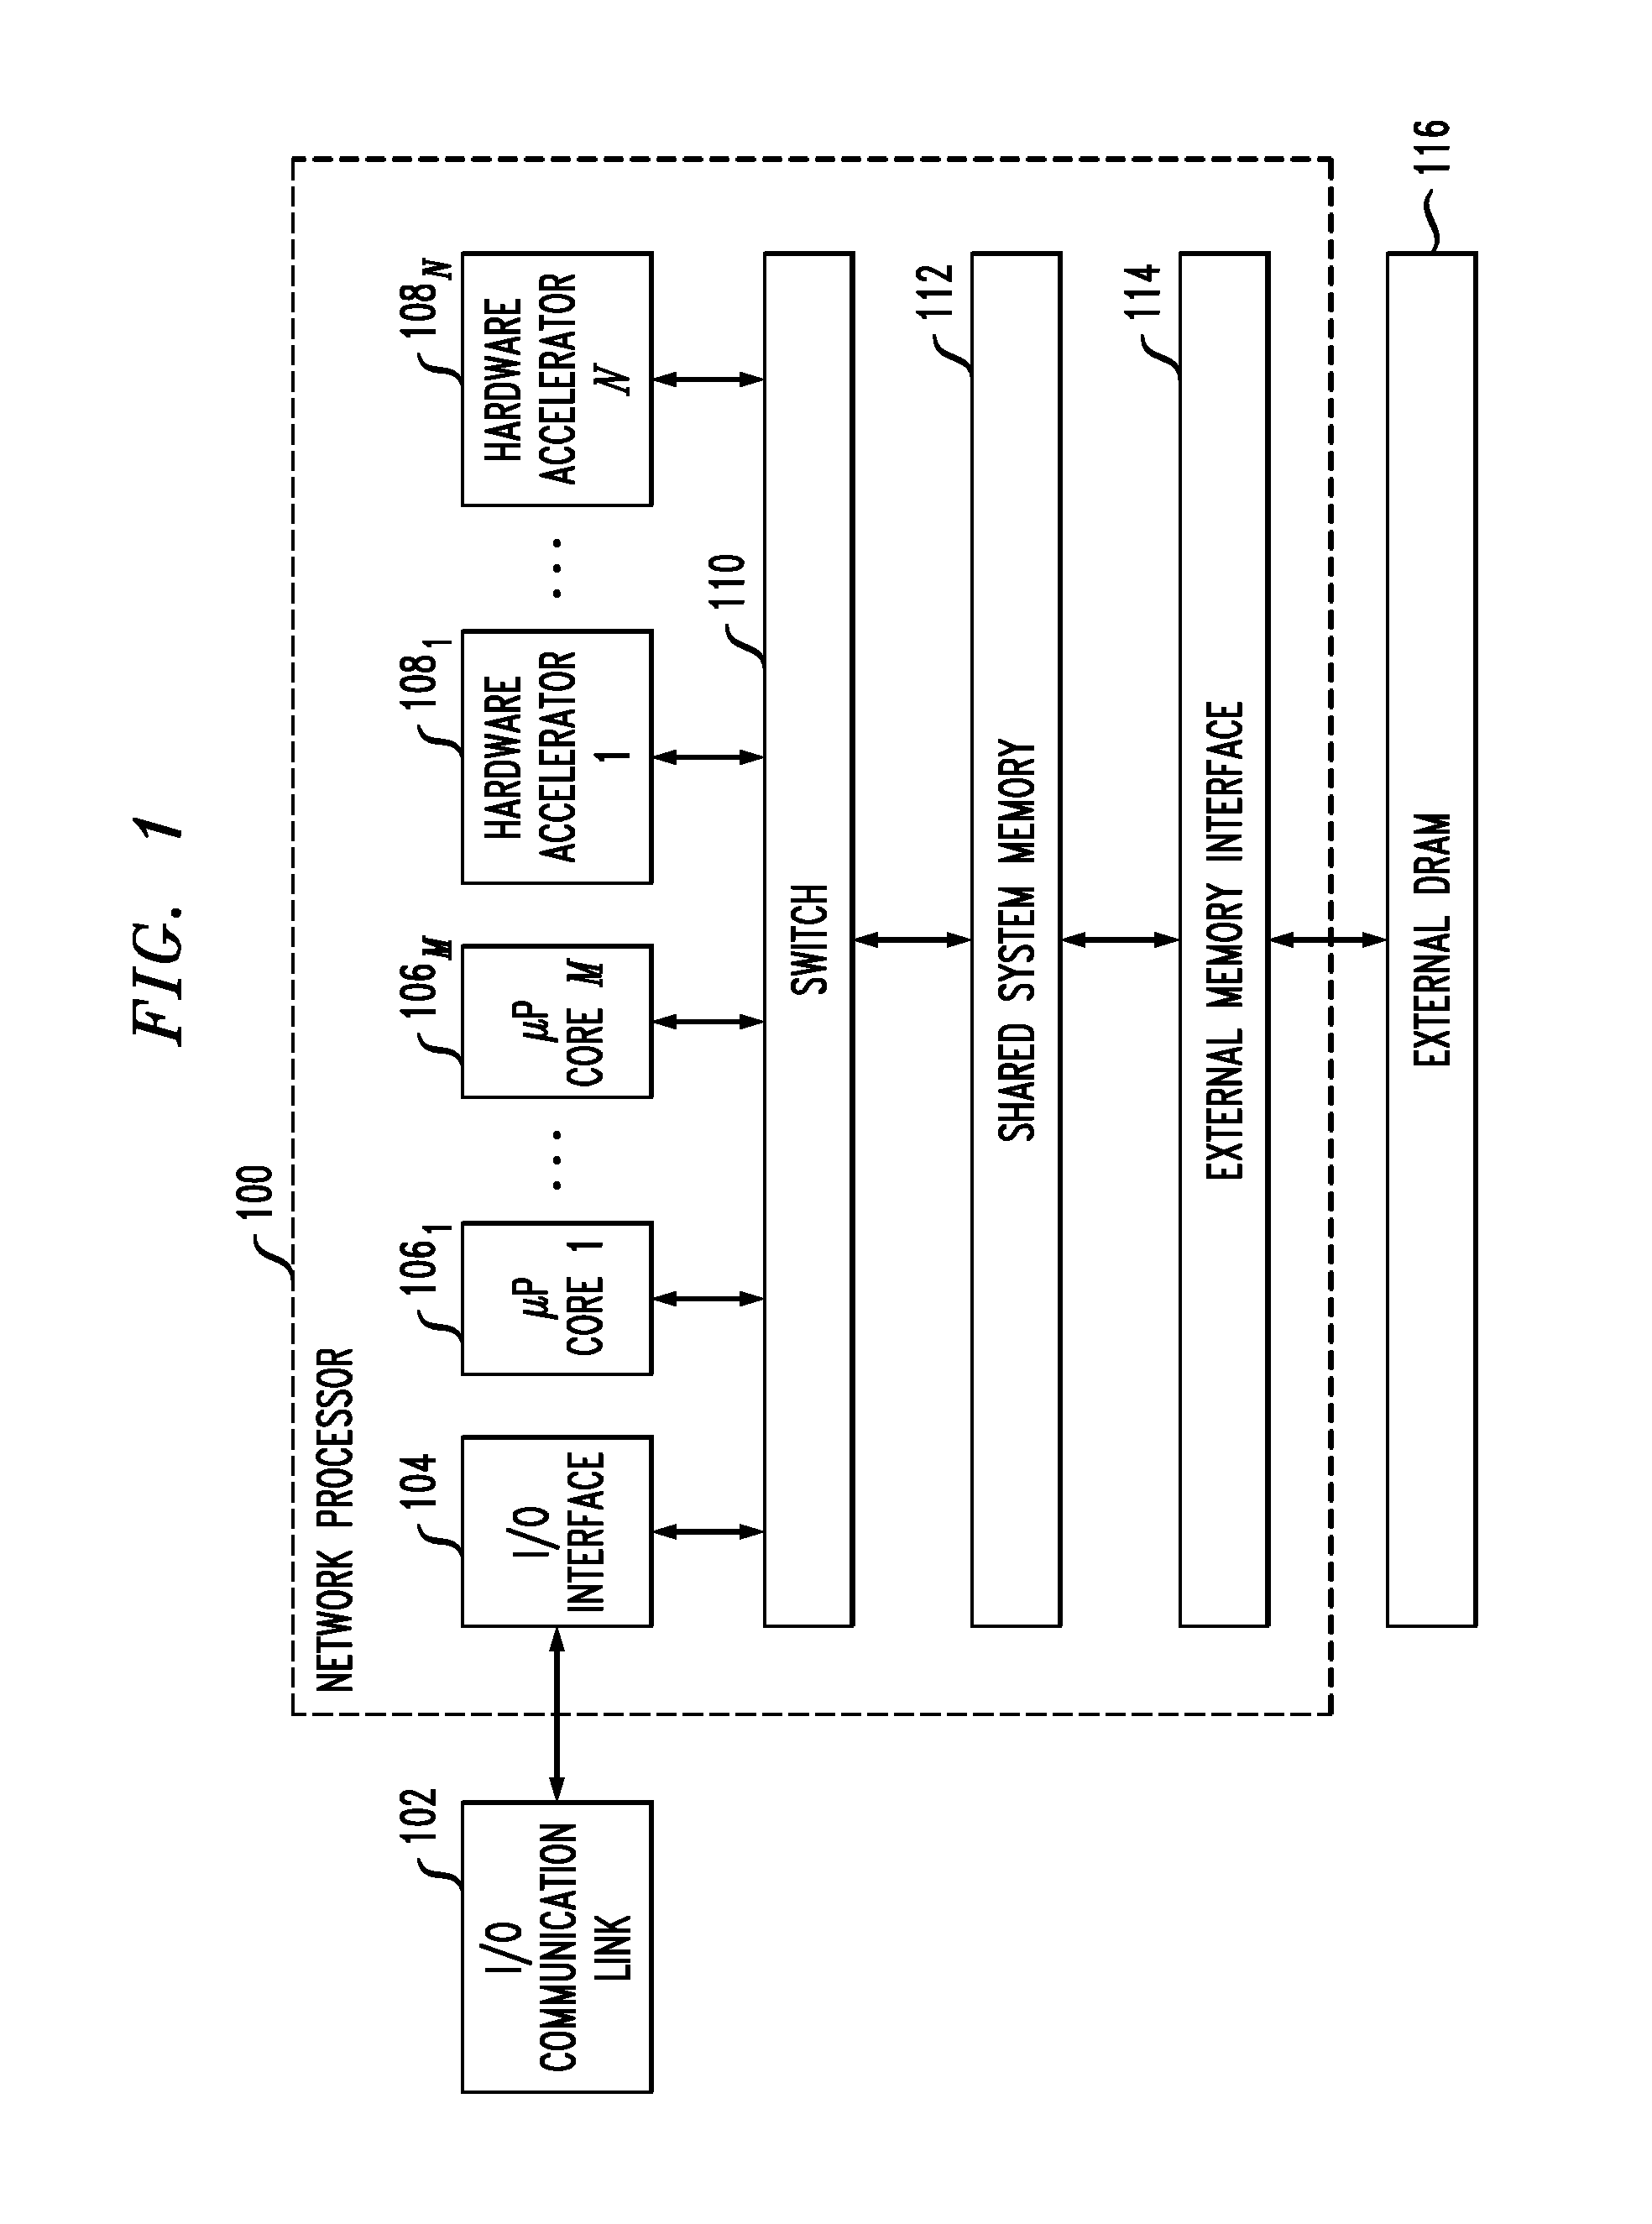 Concurrent, coherent cache access for multiple threads in a multi-core, multi-thread network processor